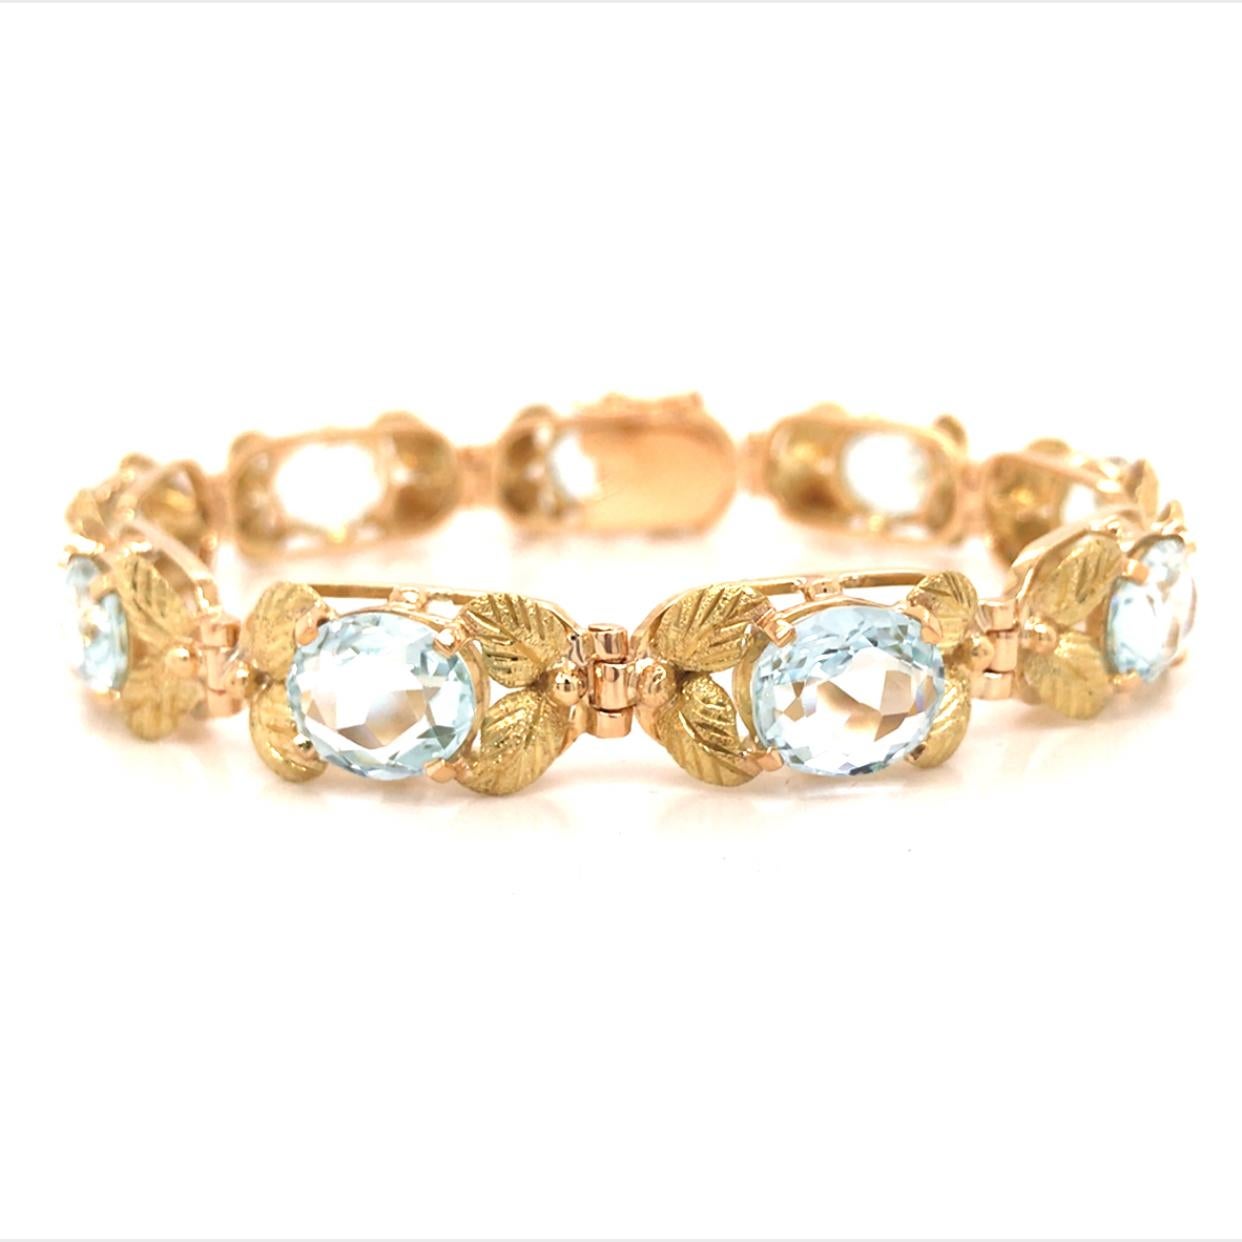 H Stern Aqua Link Bracelet in 18K Yellow Gold.  (9) Aqua Gemstones weighing approximately 19 carat total weight are expertly set in engraved links.  The Bracelet measures 7 1/2 inch in length and 3/8 inch in width.  23.9 grams.  Stamps (S) 750.